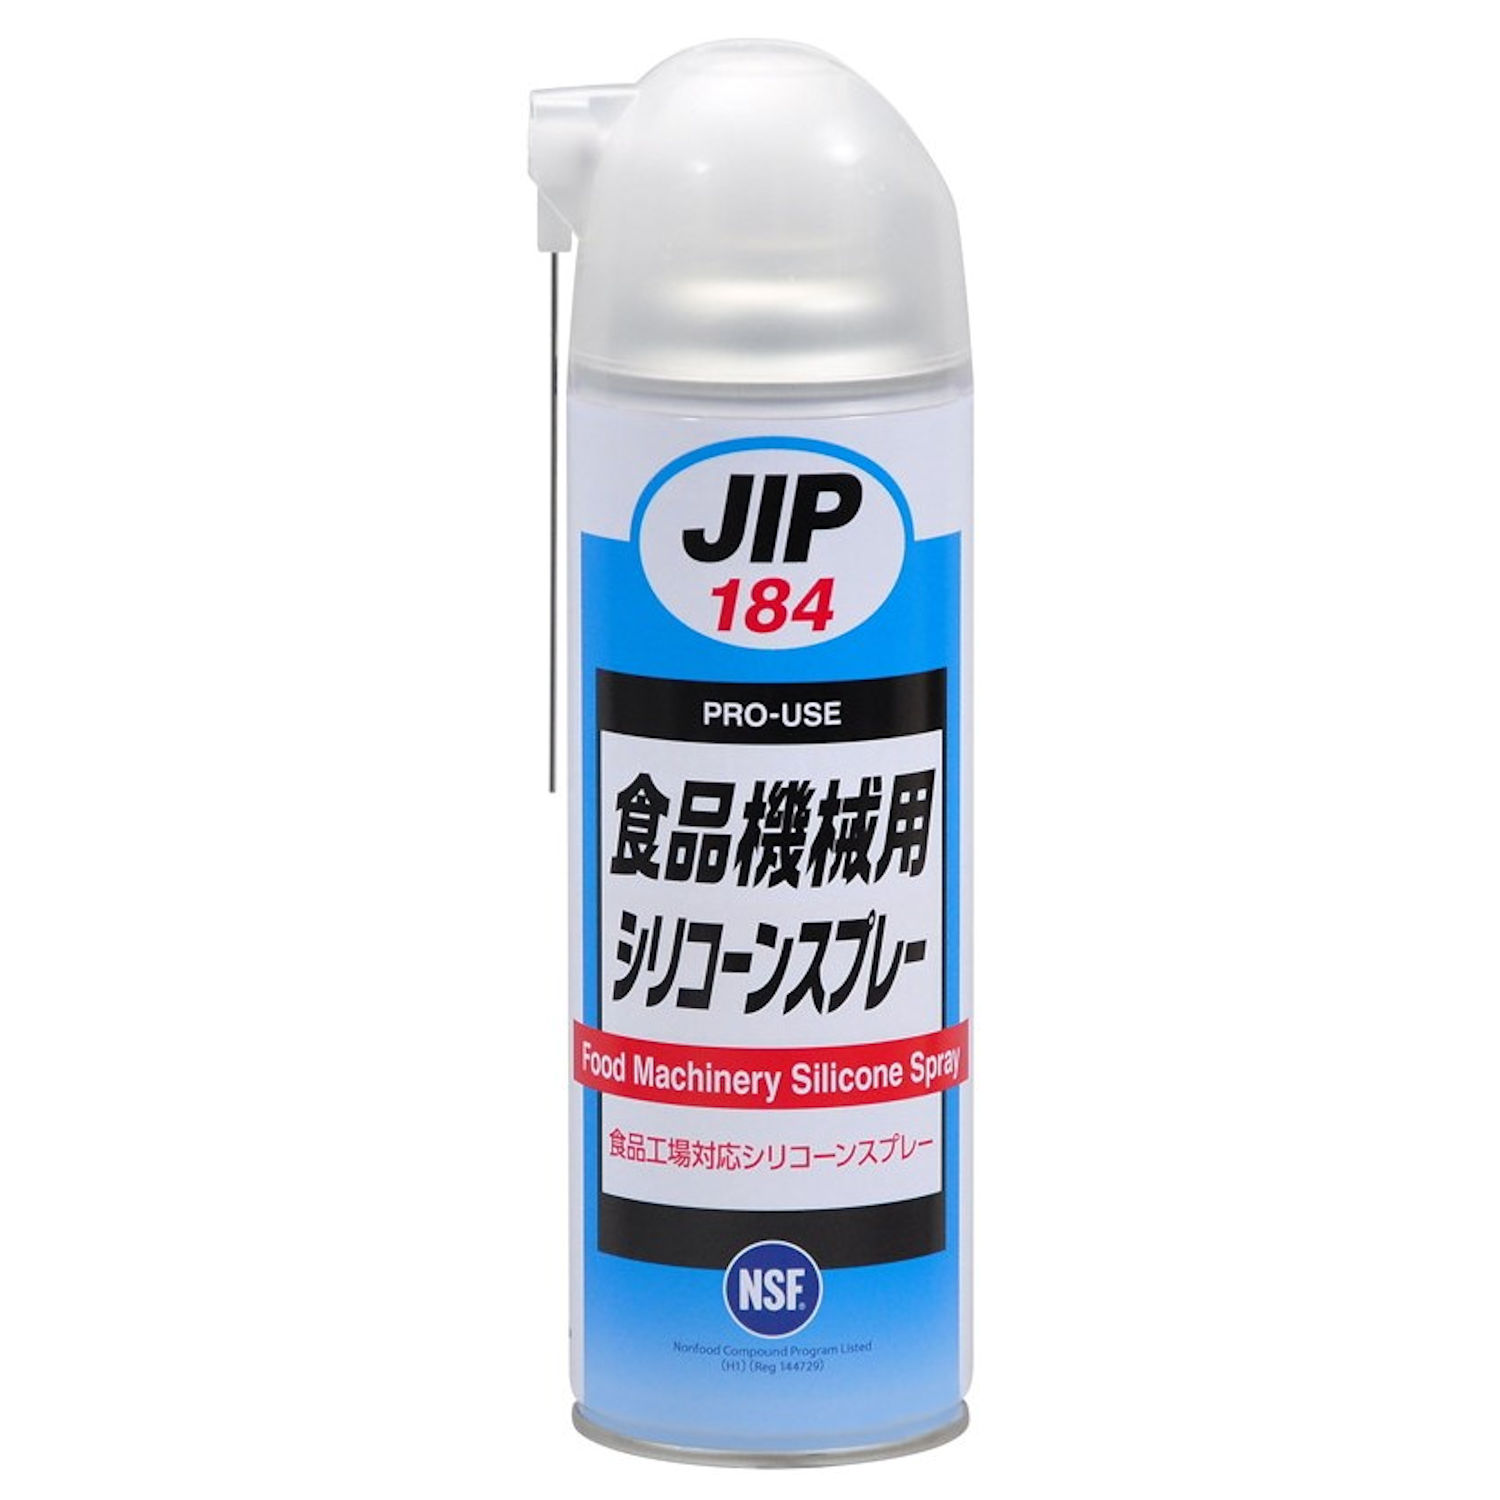 Lubricant, Food Machinery Silicone Spray